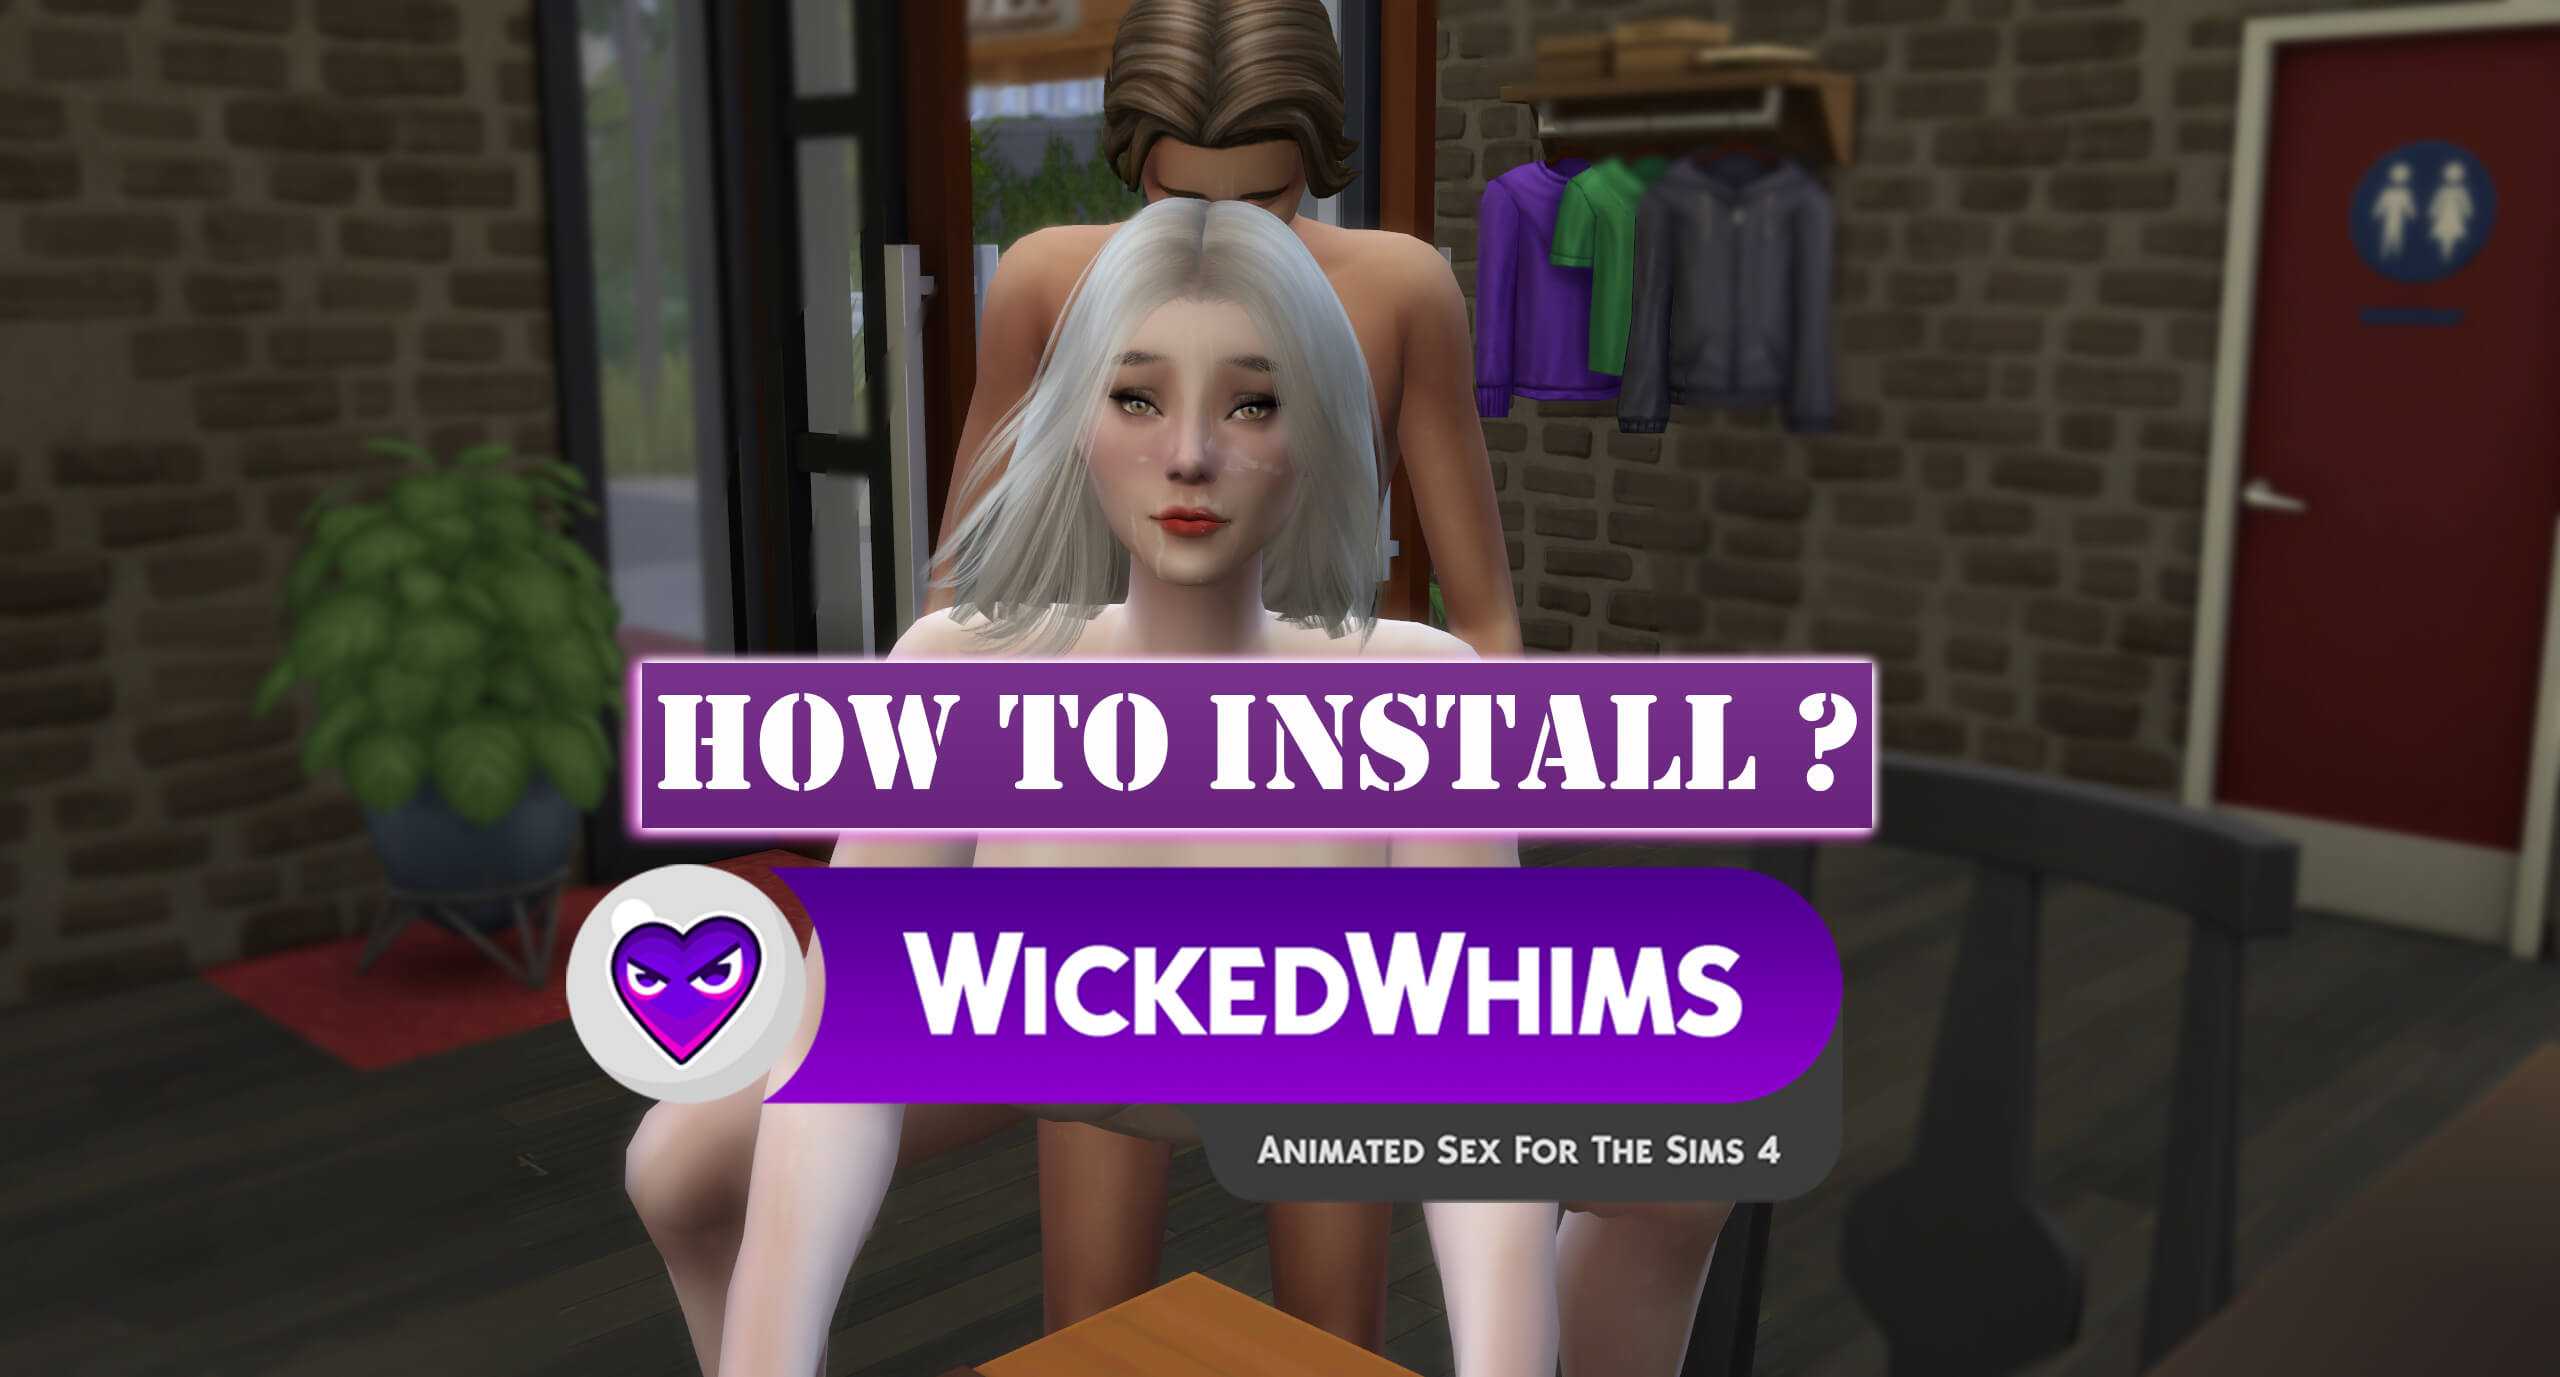 Wicked whims sims 4 русификатор последняя версия